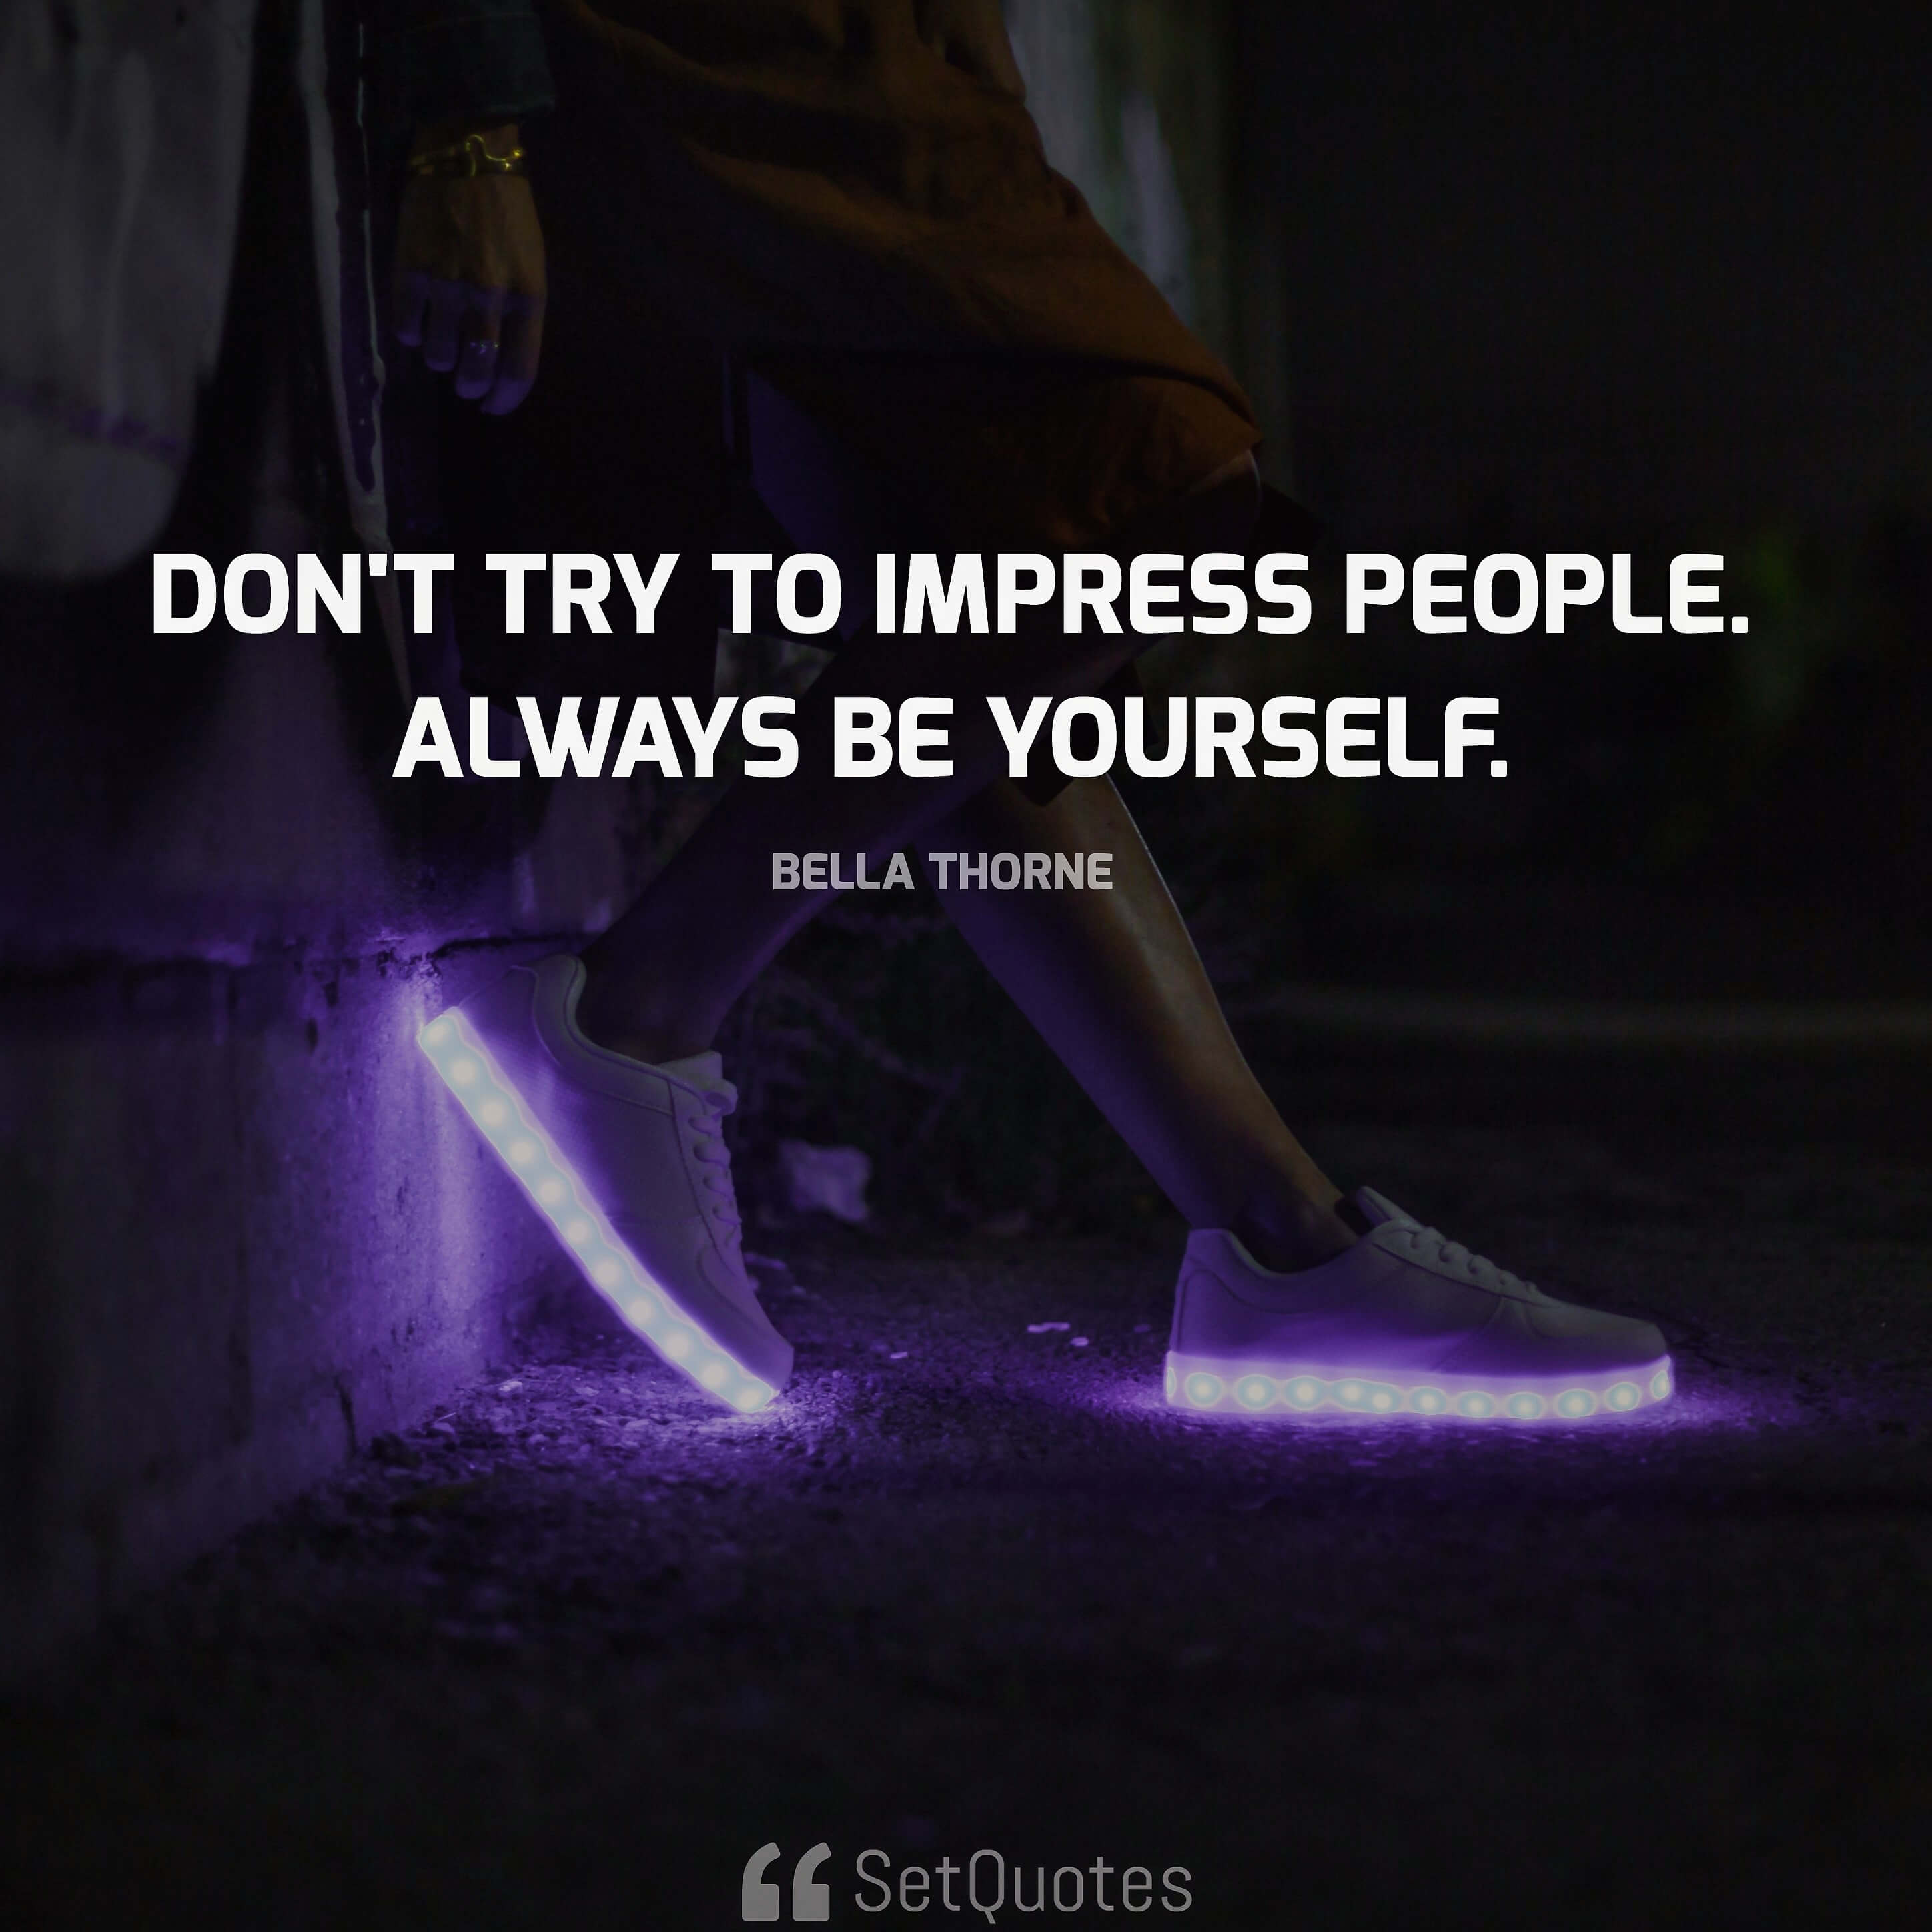 Don't try to impress people. Always be yourself. - Bella Thorne